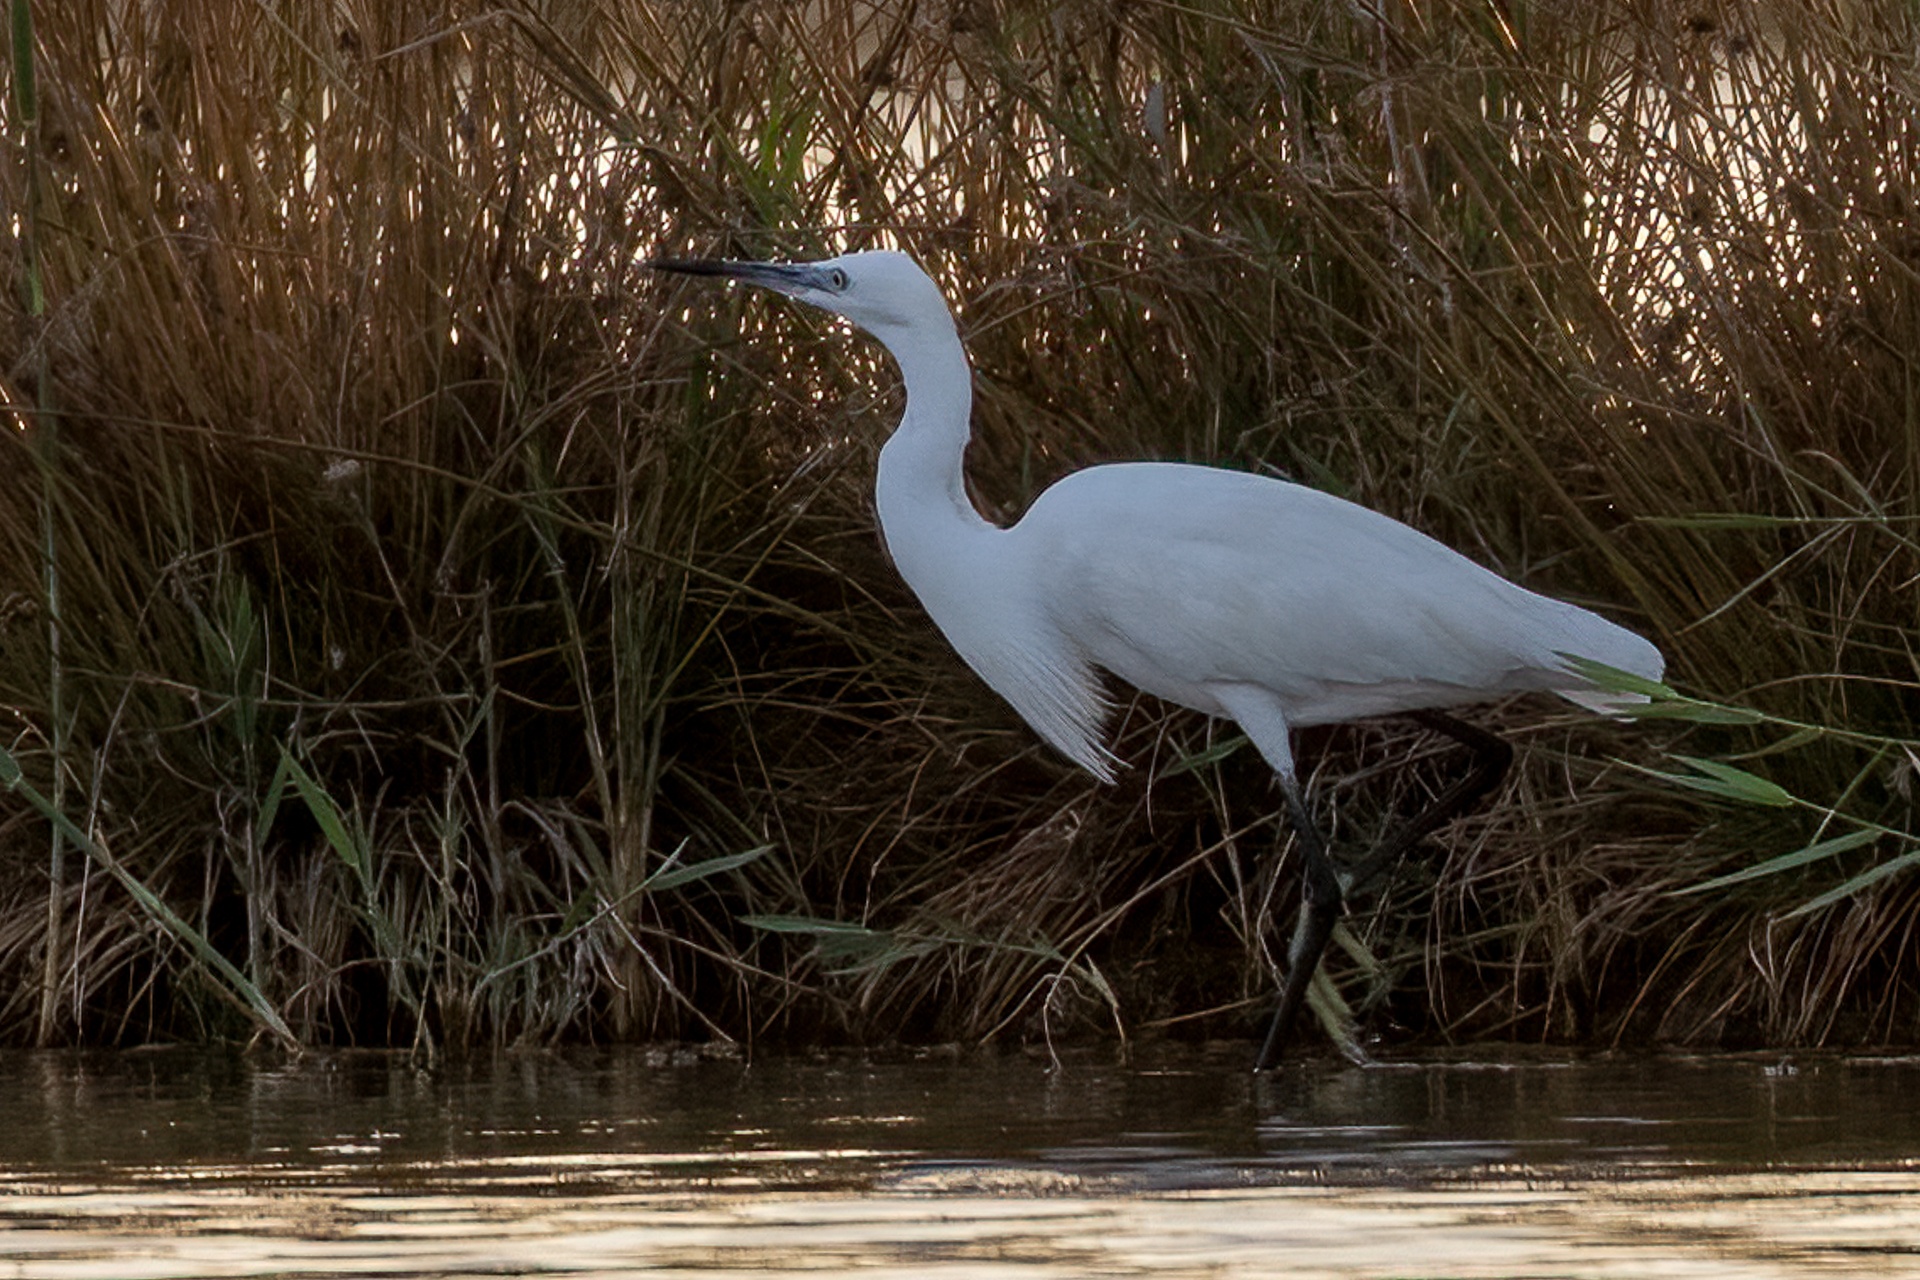 Egret among the reeds